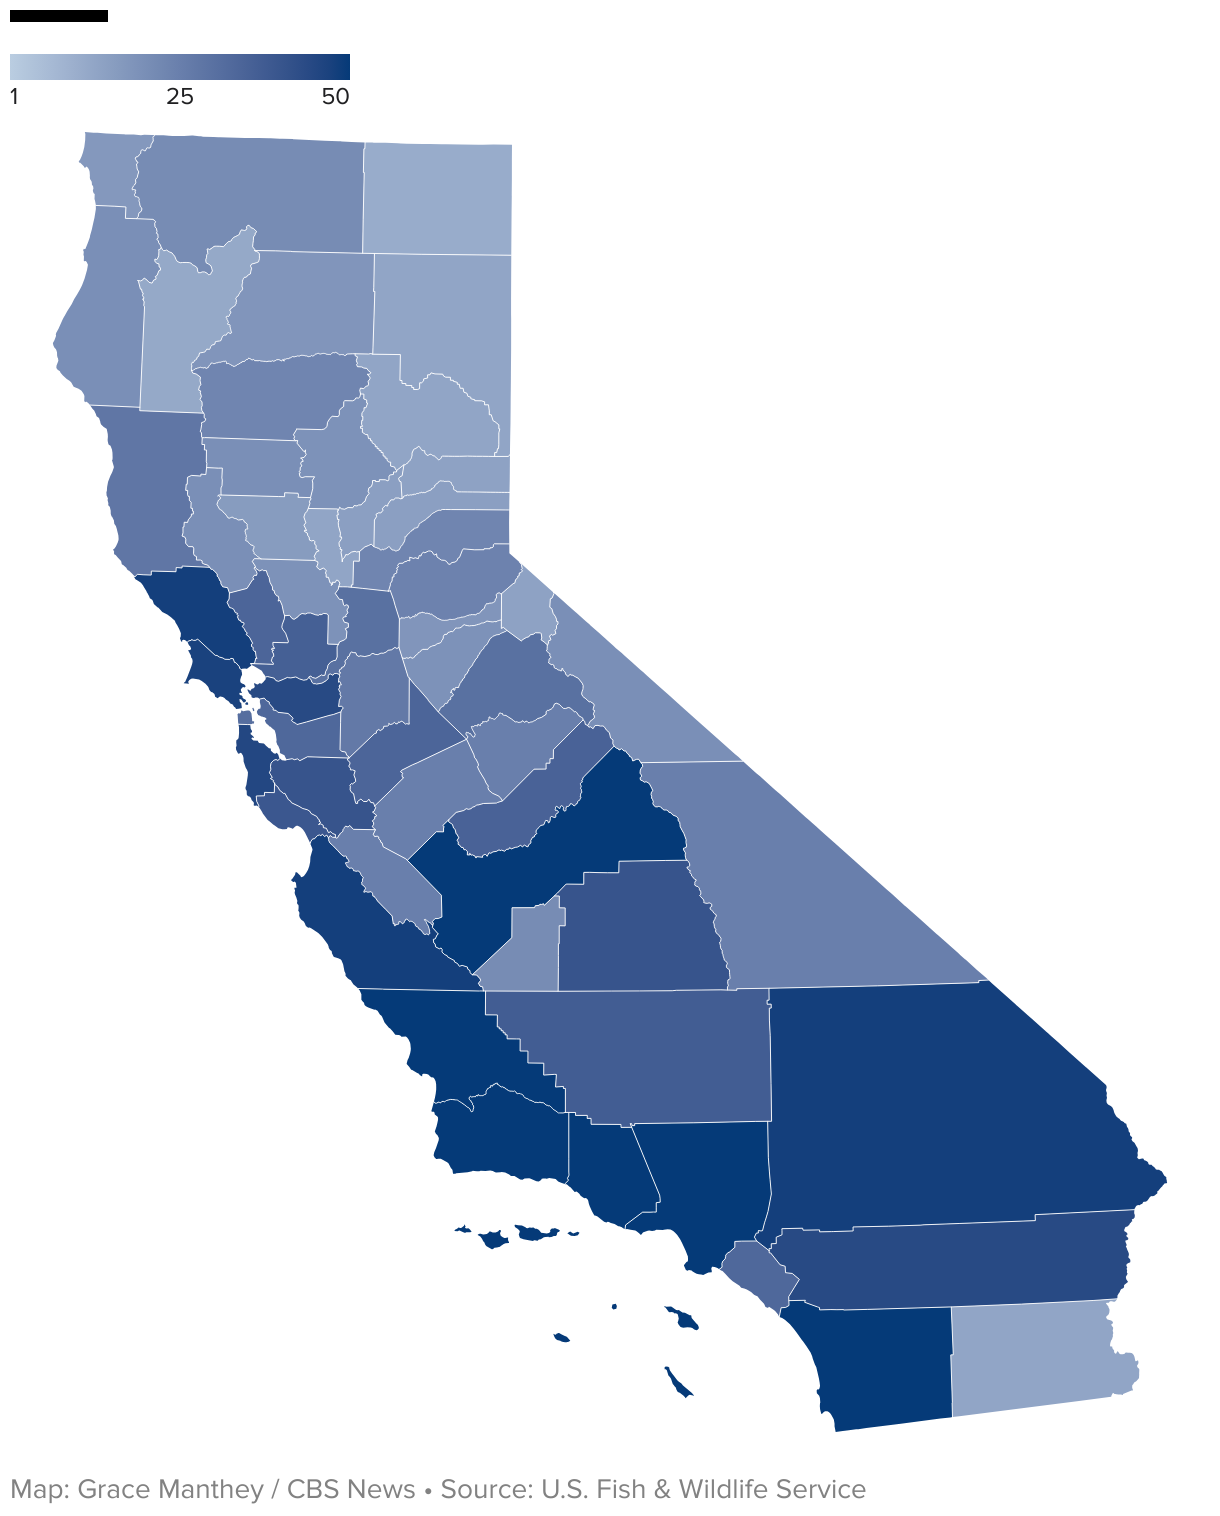 A map showing the number of endangered threatened species by county in California, colored in shades of blue. Coastal, central and Southern California have the highest numbers.